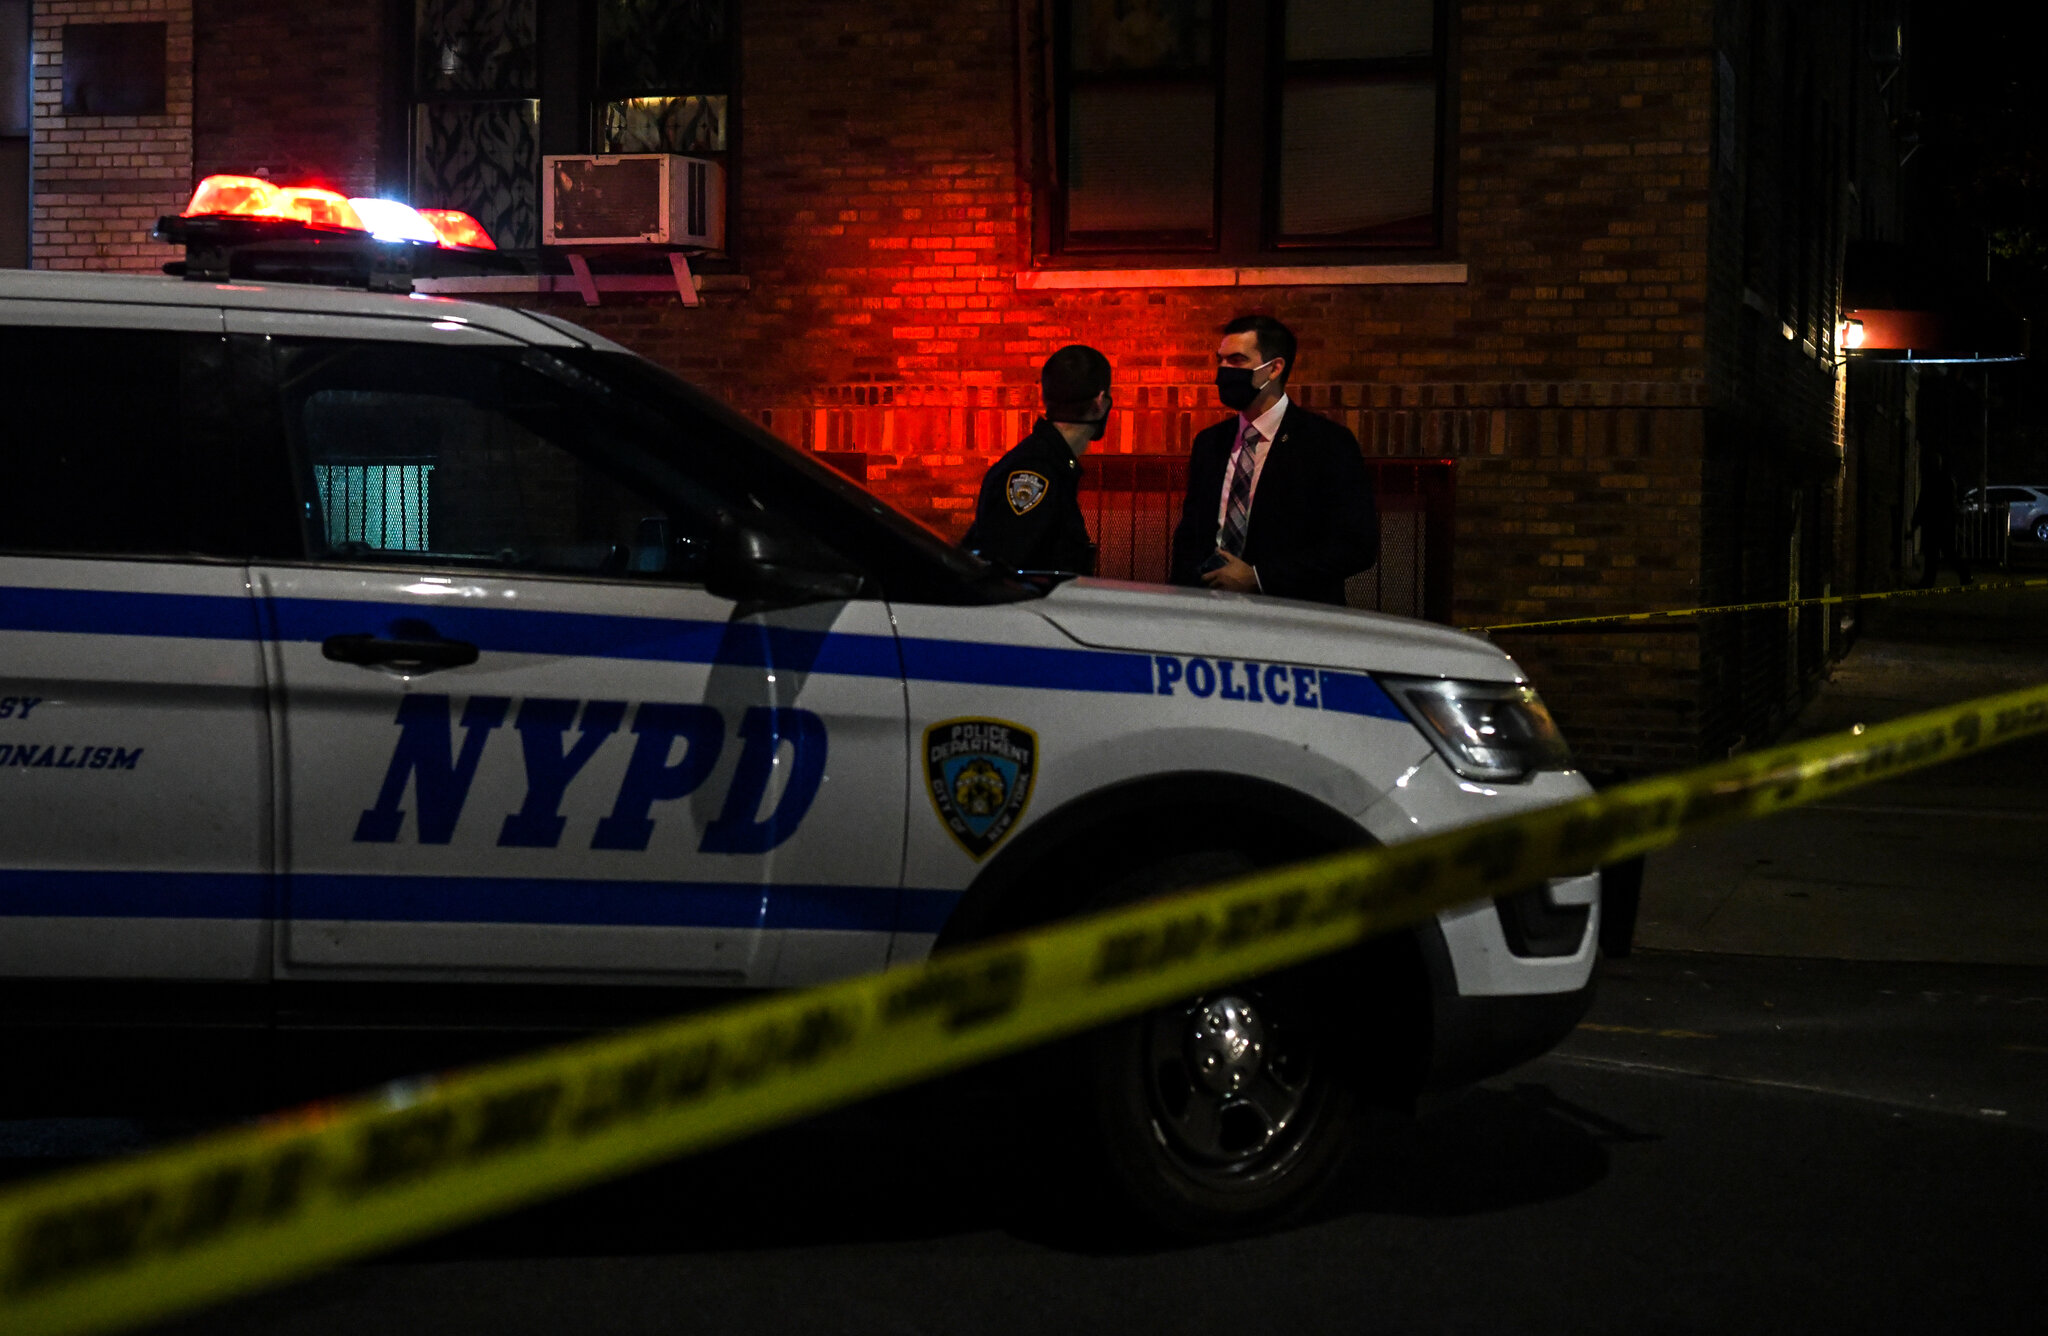 Tragic Incident Unfolds in Harlem: 47-Year-Old Man Fatally Stabbed in Domestic Dispute, Woman Under Questioning